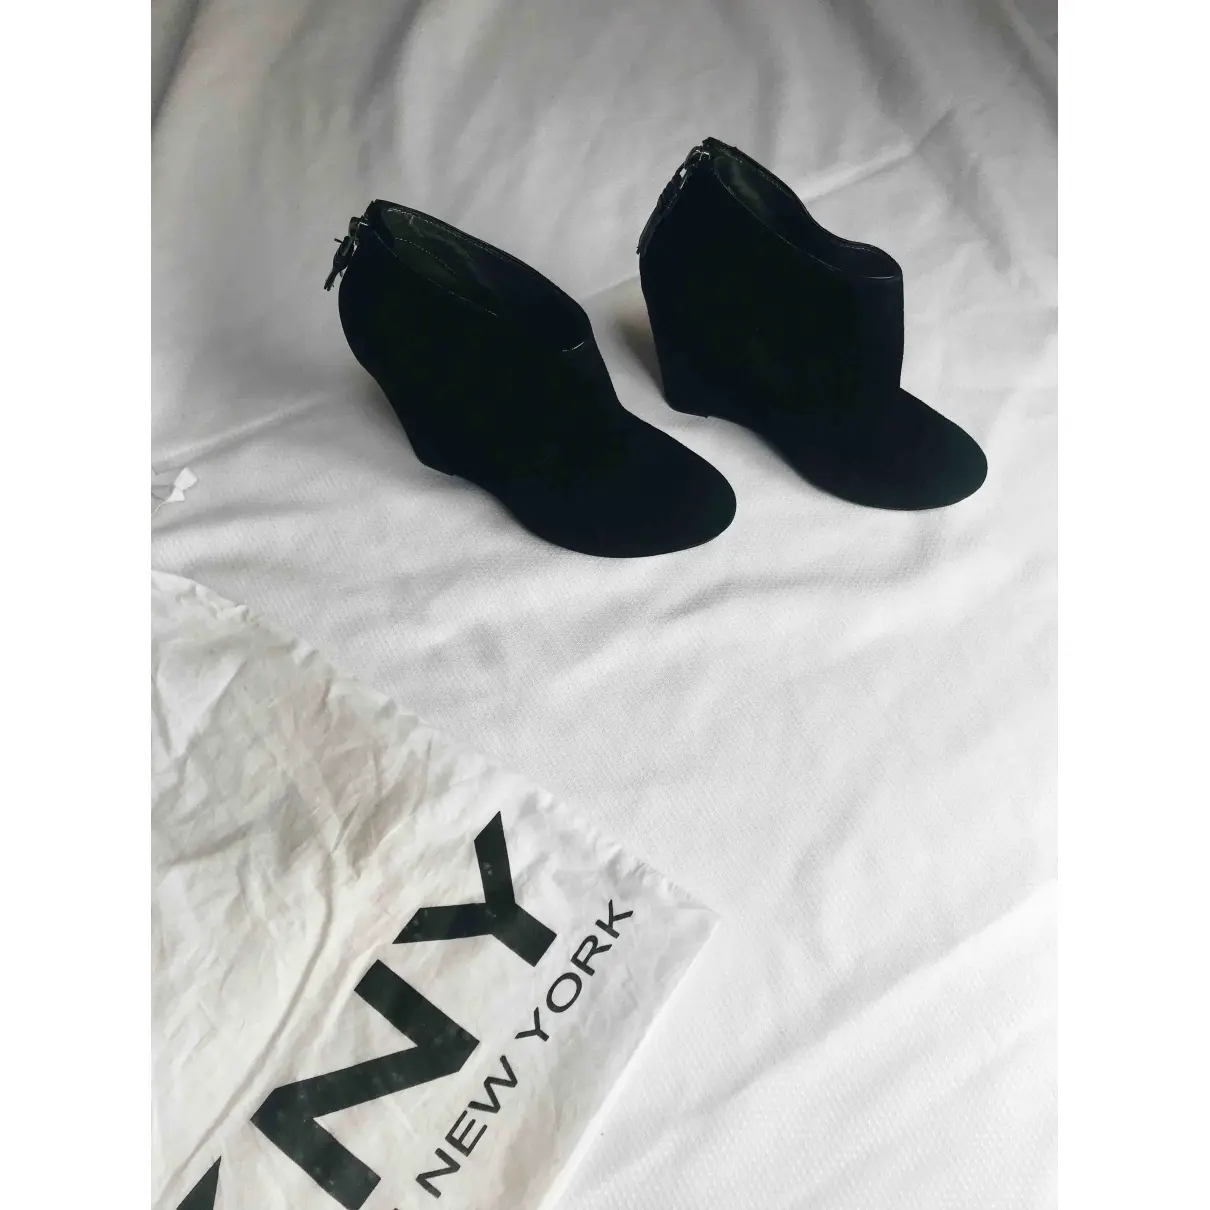 Dkny Heels for sale